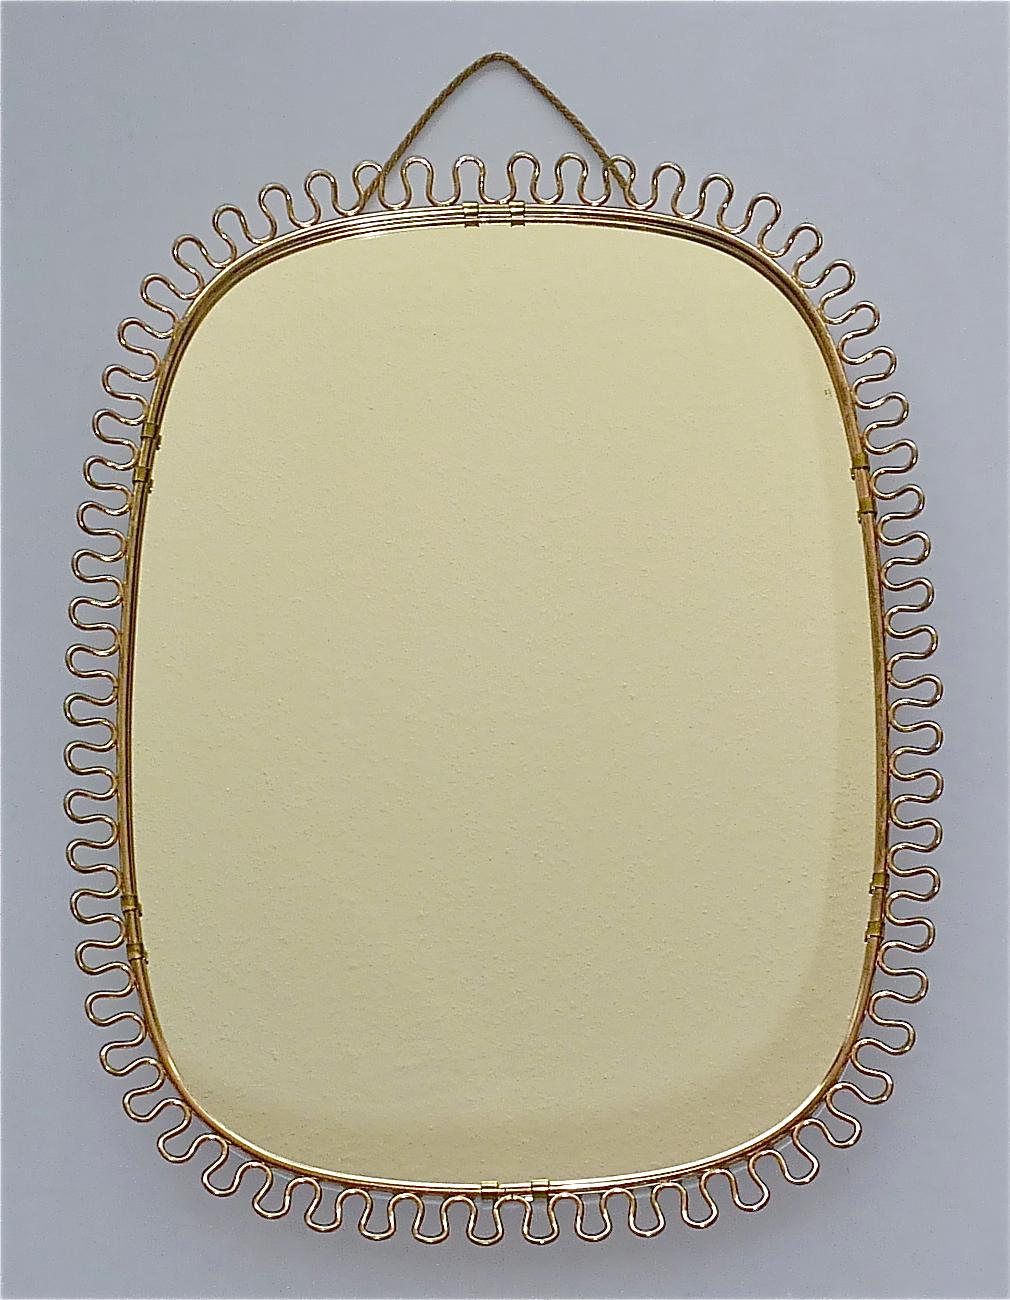 Sculptural and elegant mid-century wall mirror by Josef Frank Austria or Sweden for Svenskt Tenn, circa 1940s-1950s which is made of patinated brass metal, a beautiful brass loop-wire-decoration, original mirror glass, solid wood at the back and its